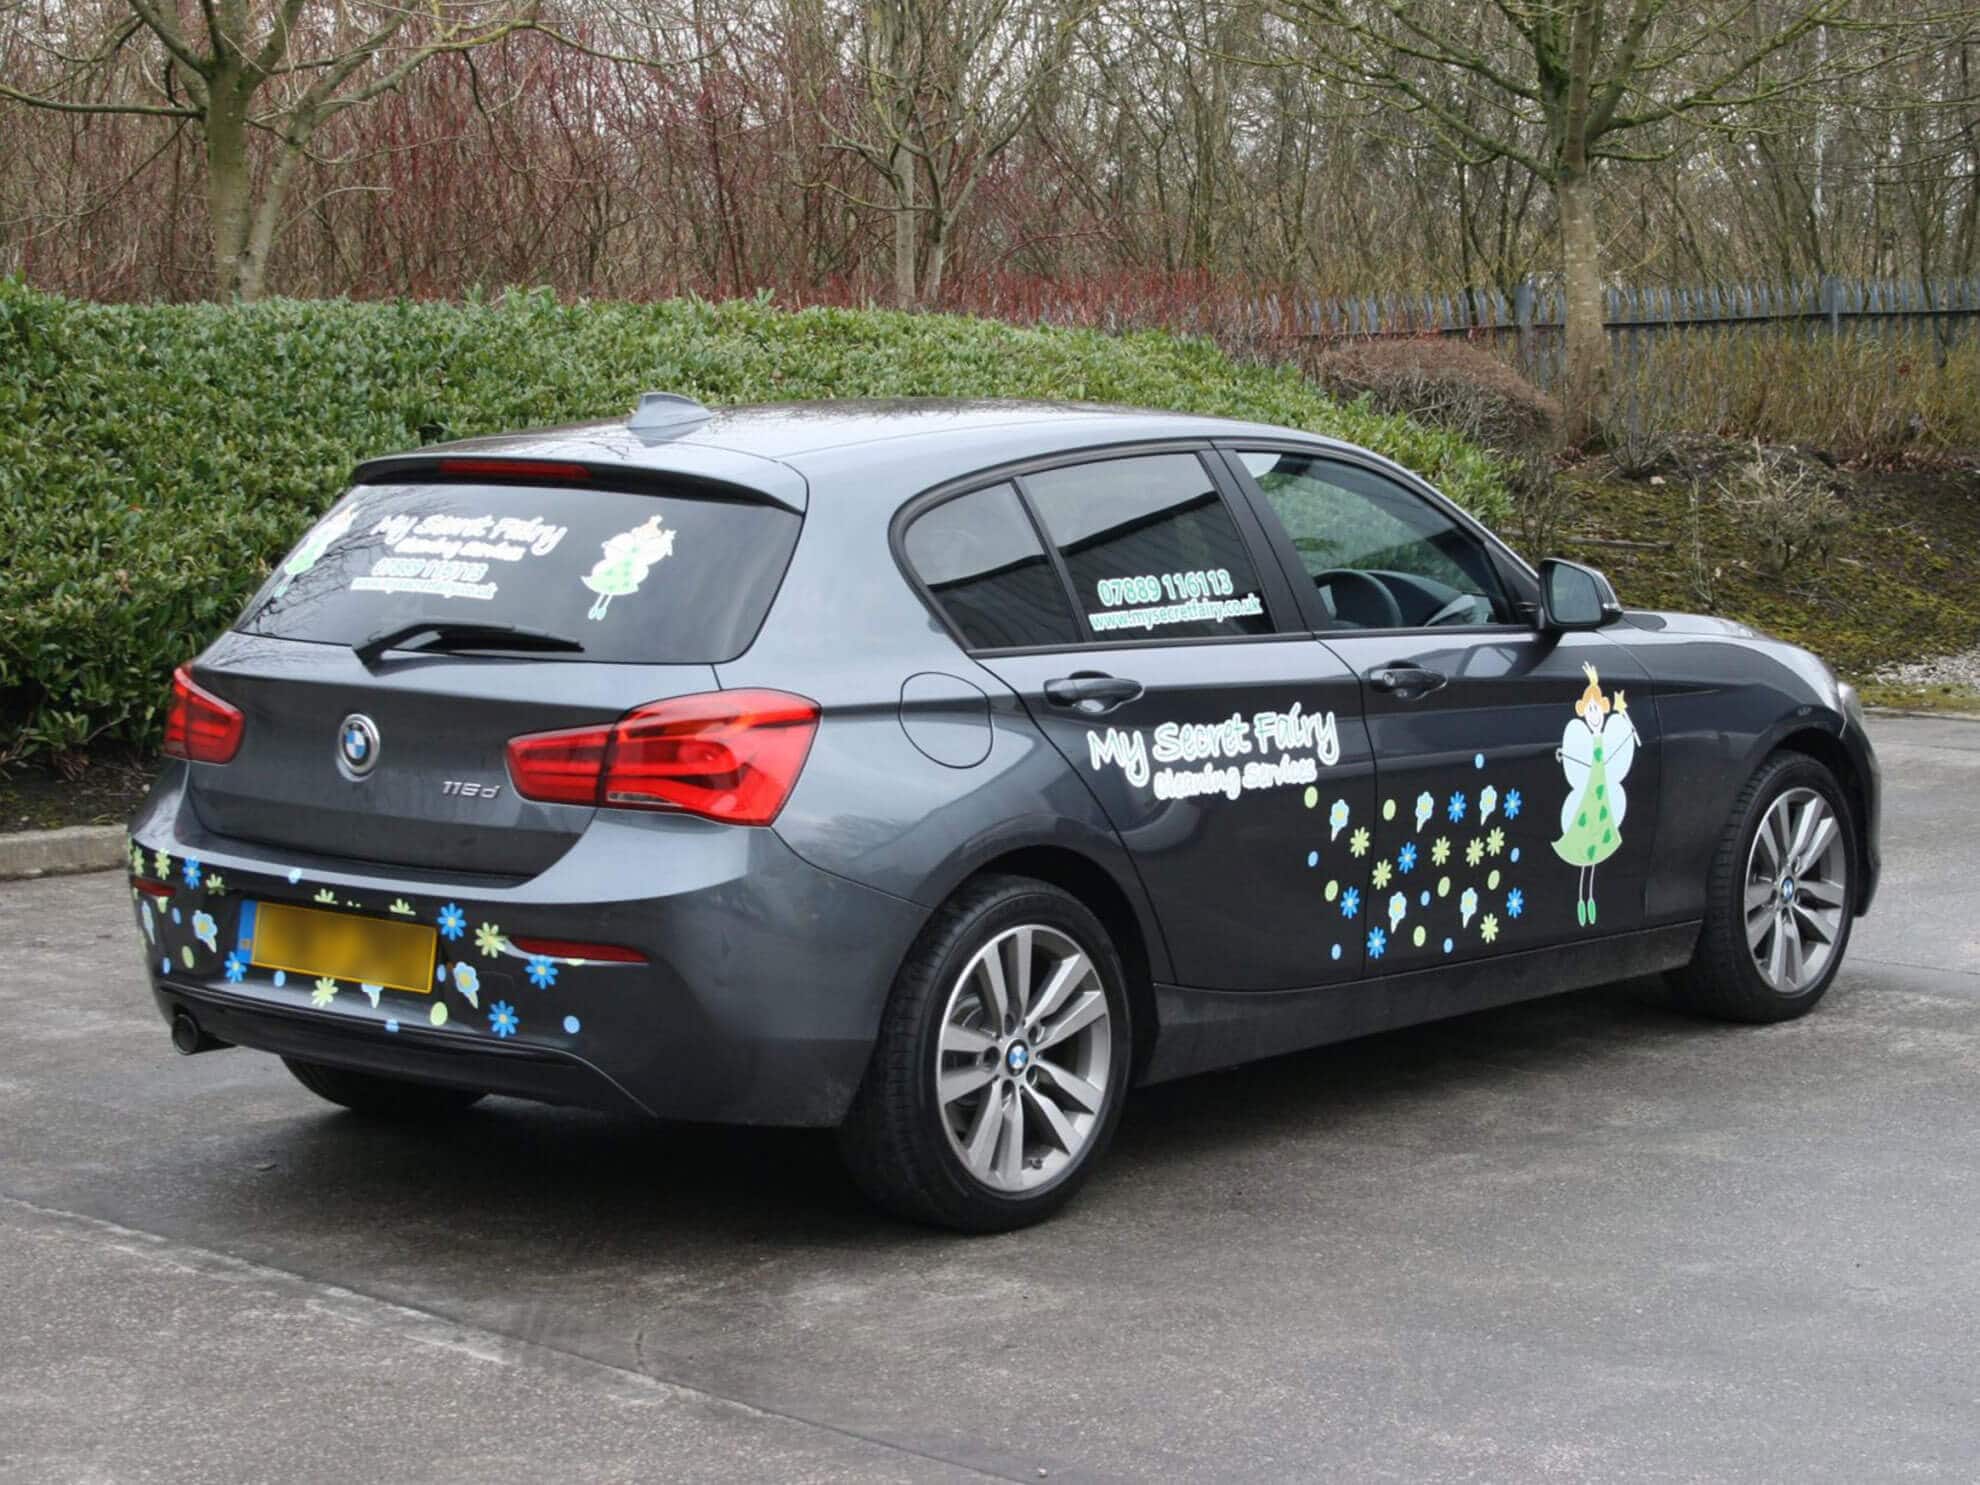 My Secret Fairy cut vinyl vehicle graphics and wrapping